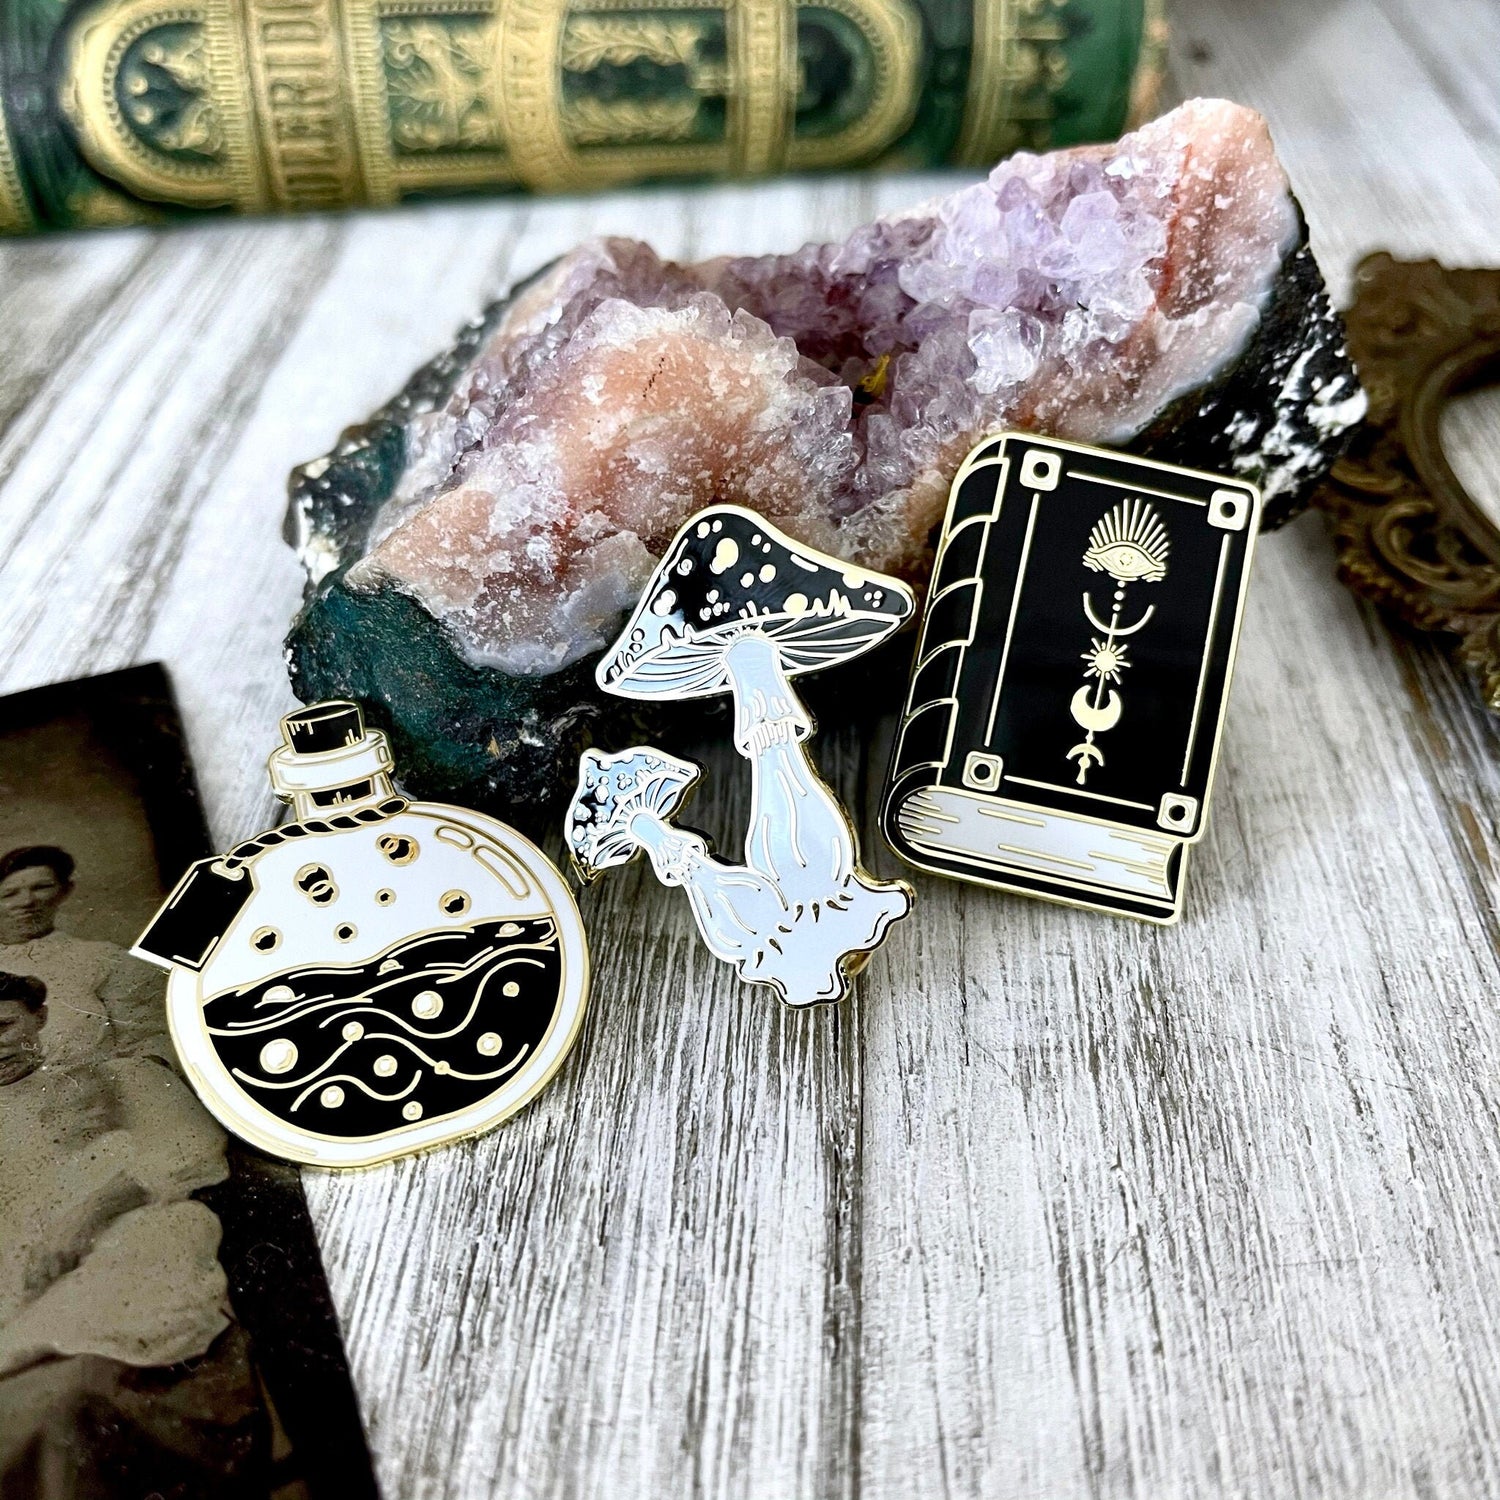 Accessories, cute pins, earthy pins, Enamel Pins, Etsy ID: 1017543096, goth pins, Mushroom Pin, Patches & Pins, Pin Set, Pins & Pinback Buttons, Potion Bottle Pin, Witch, Witch Jewelry, Witchy, Witchy Book Pin